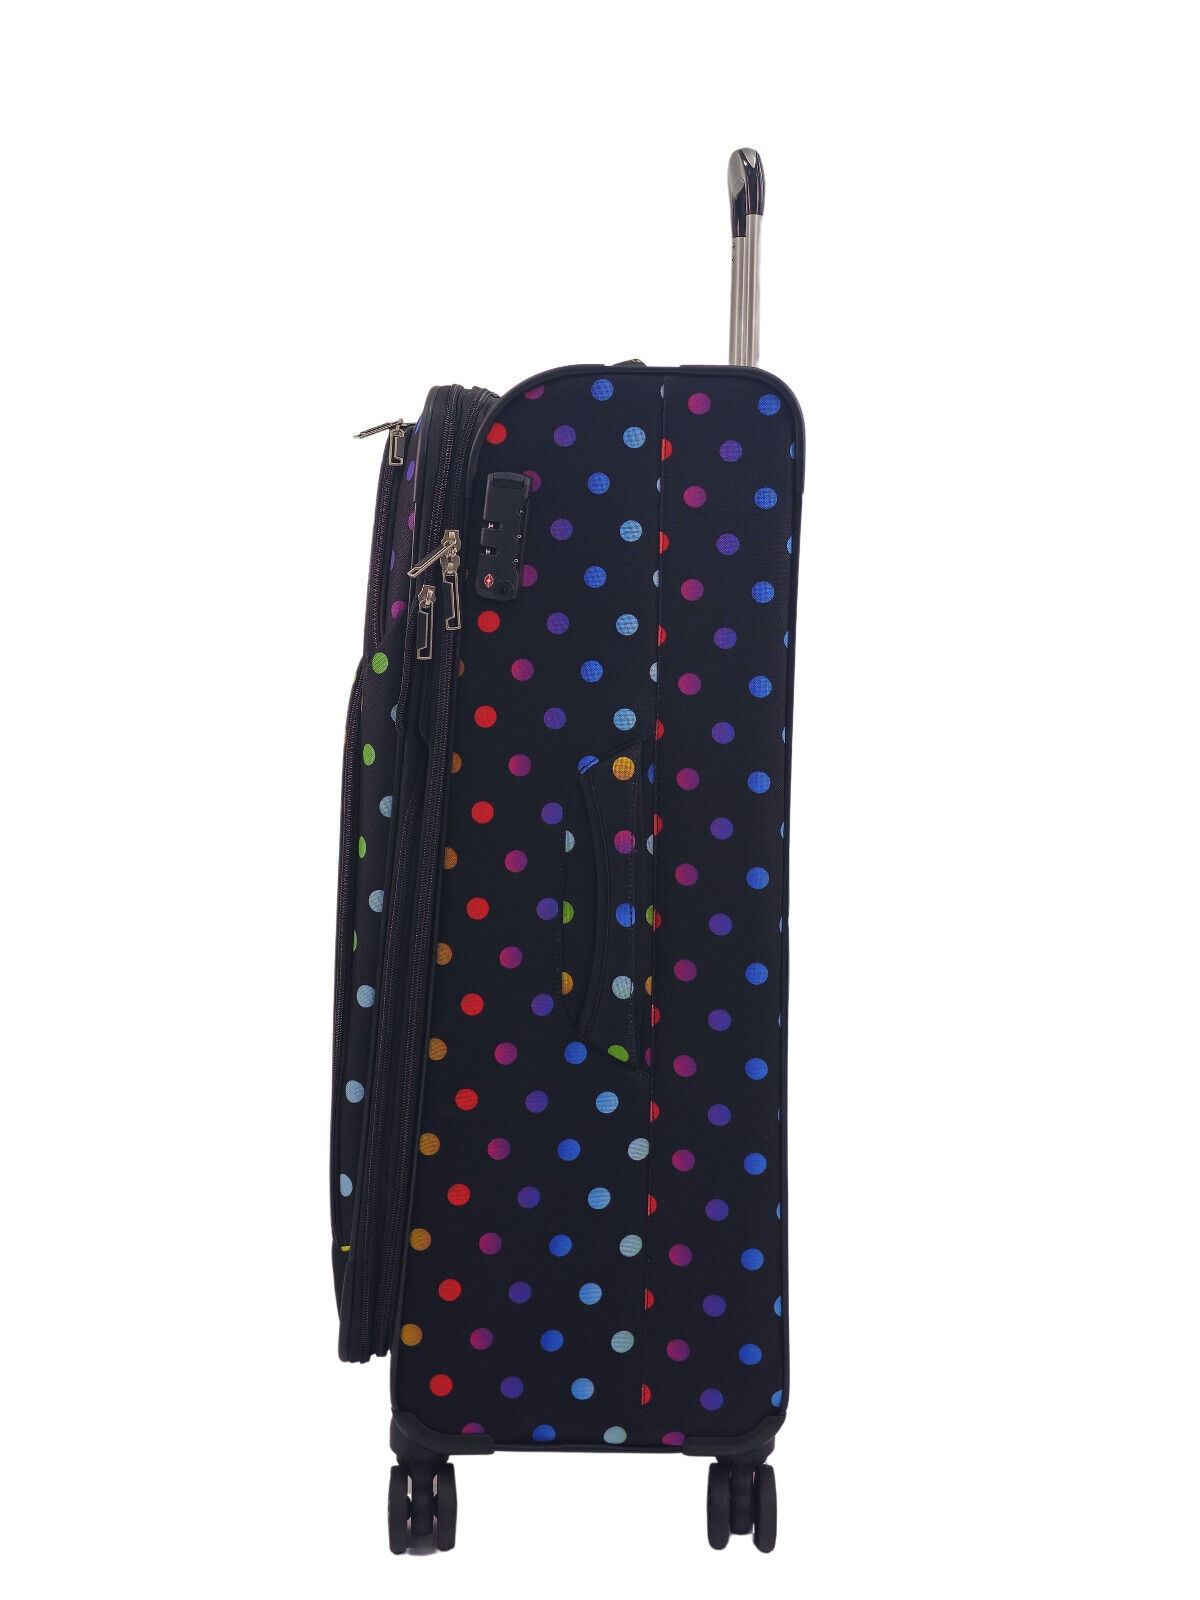 Lightweight Print Suitcases 8 Wheel Luggage Travel Soft Bags Set